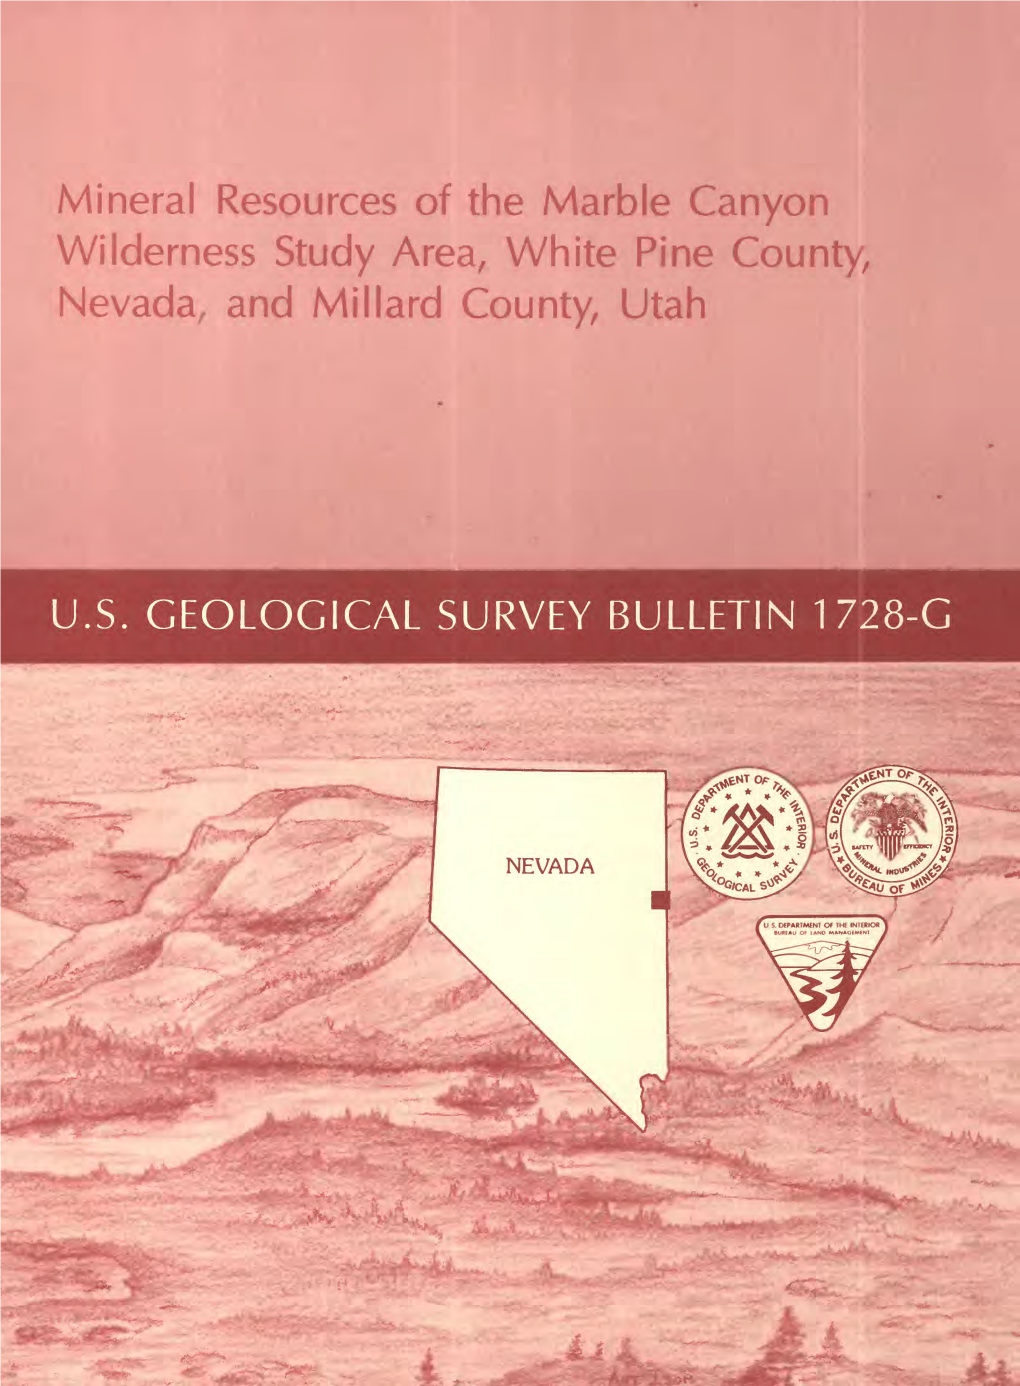 Mineral Resources of the Marble Canyon Wilderness Study Area, White Pine County, Nevada, and Mil Lard County, Utah